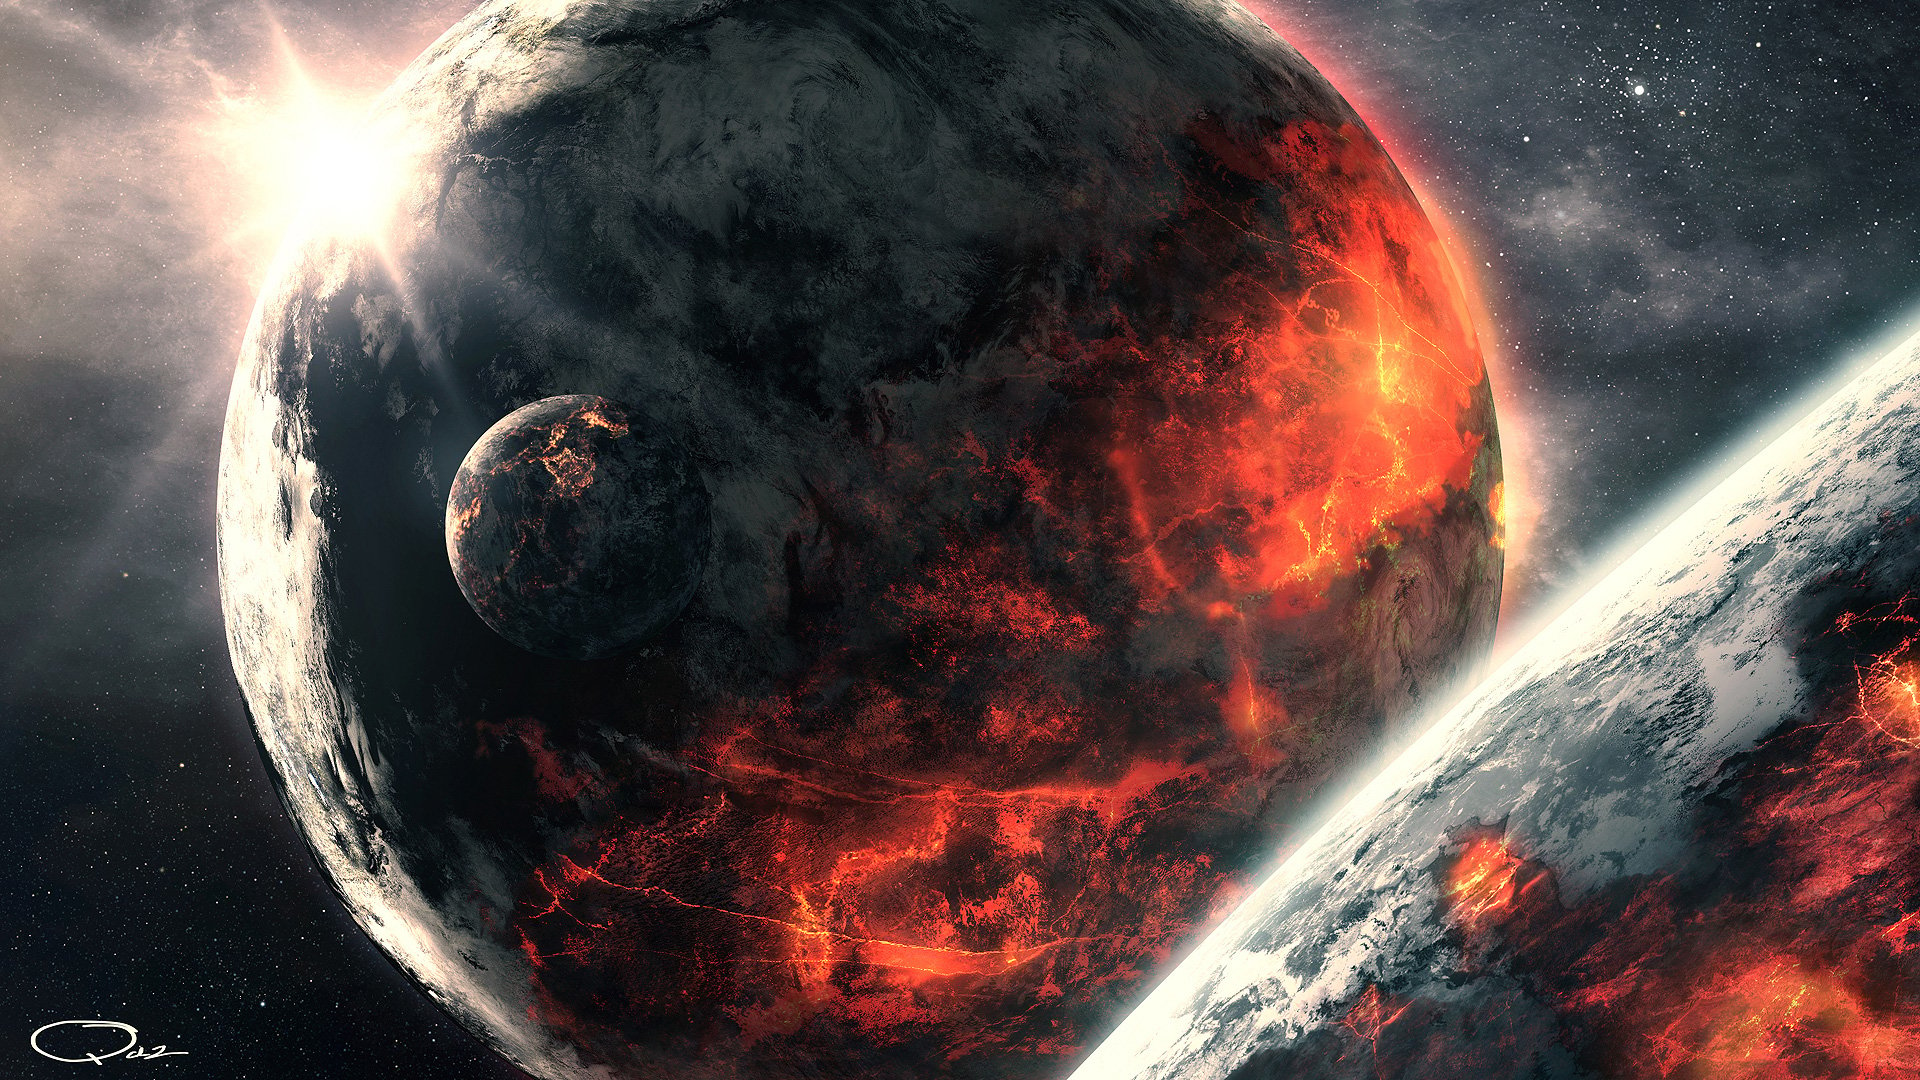 space 1080p wallpaper full hd volcanic planet in space